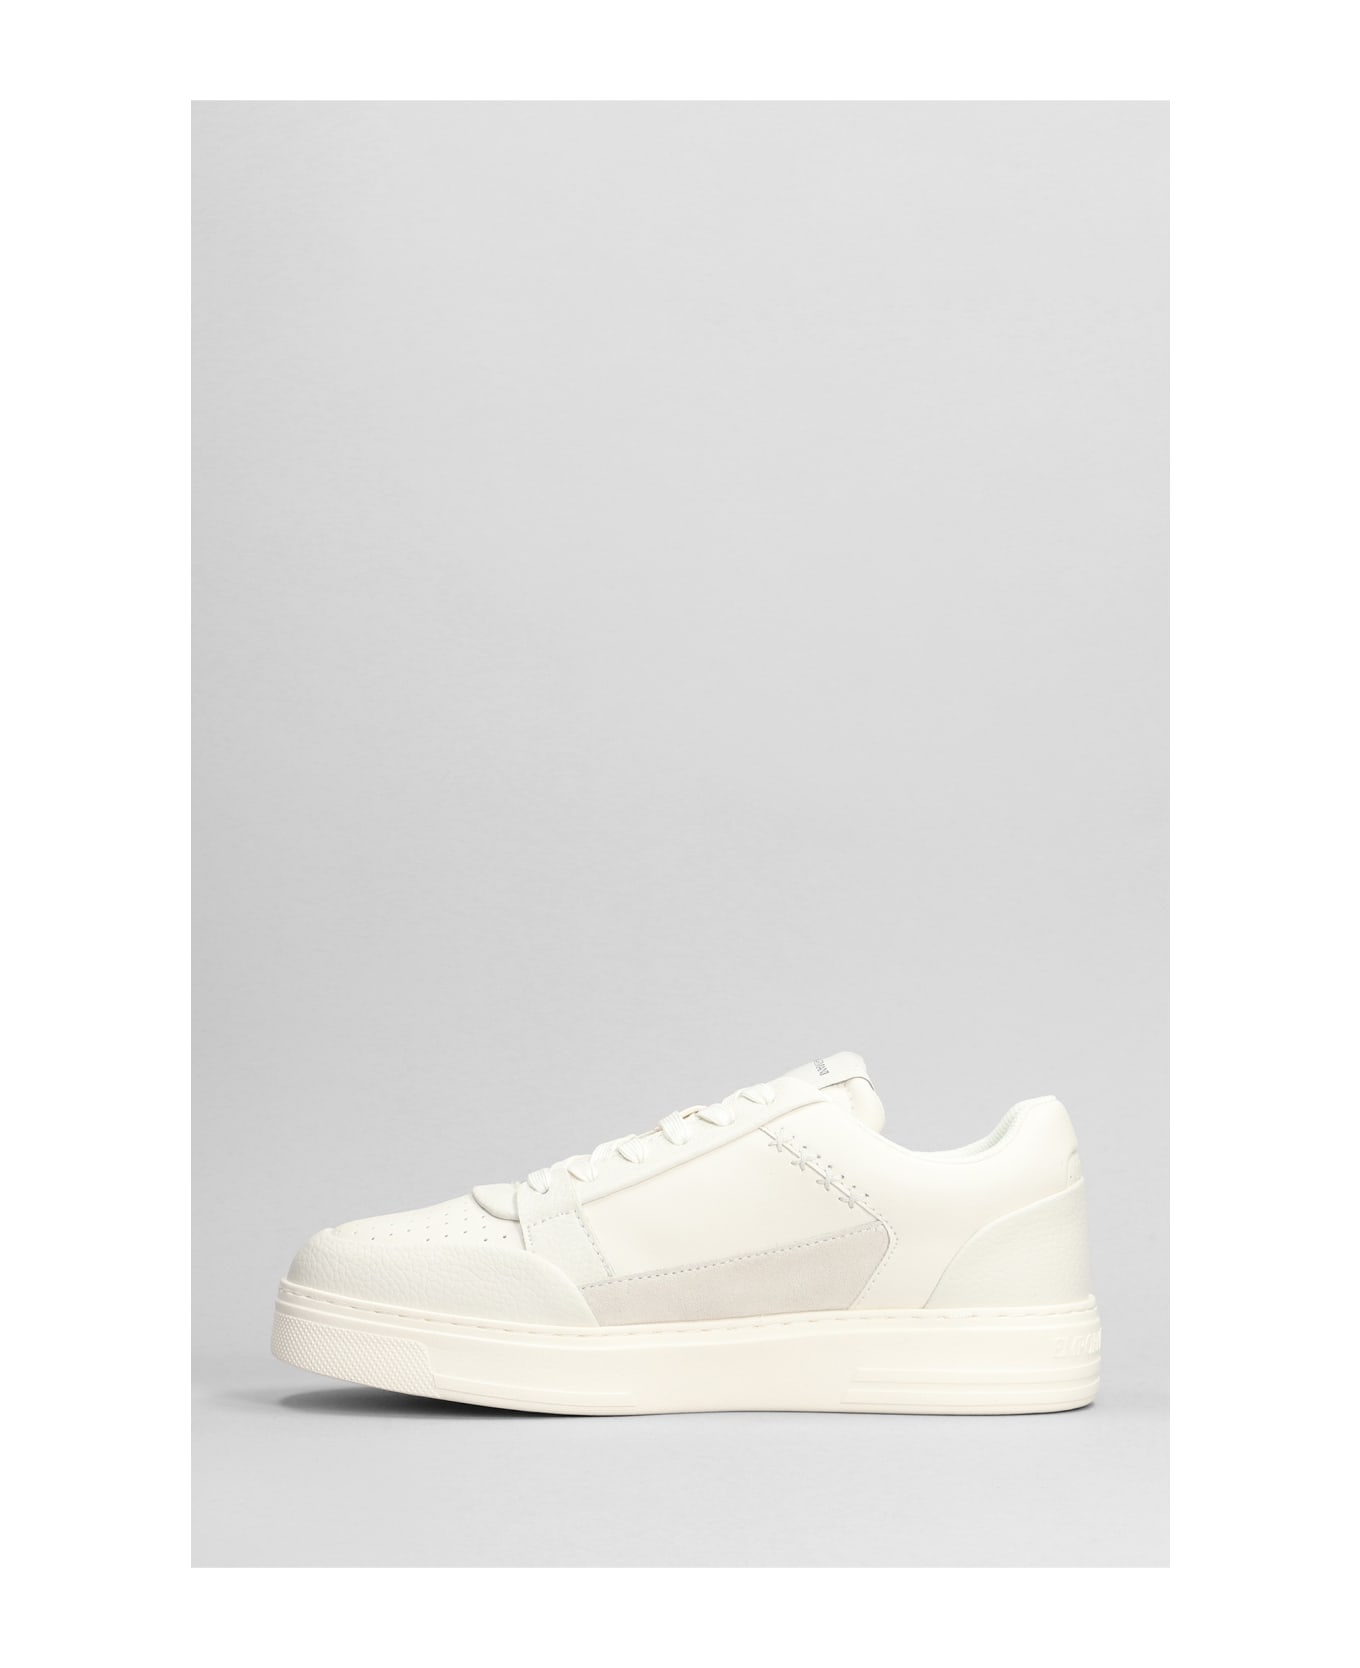 Emporio Armani Sneakers In Beige Suede And Leather - beige